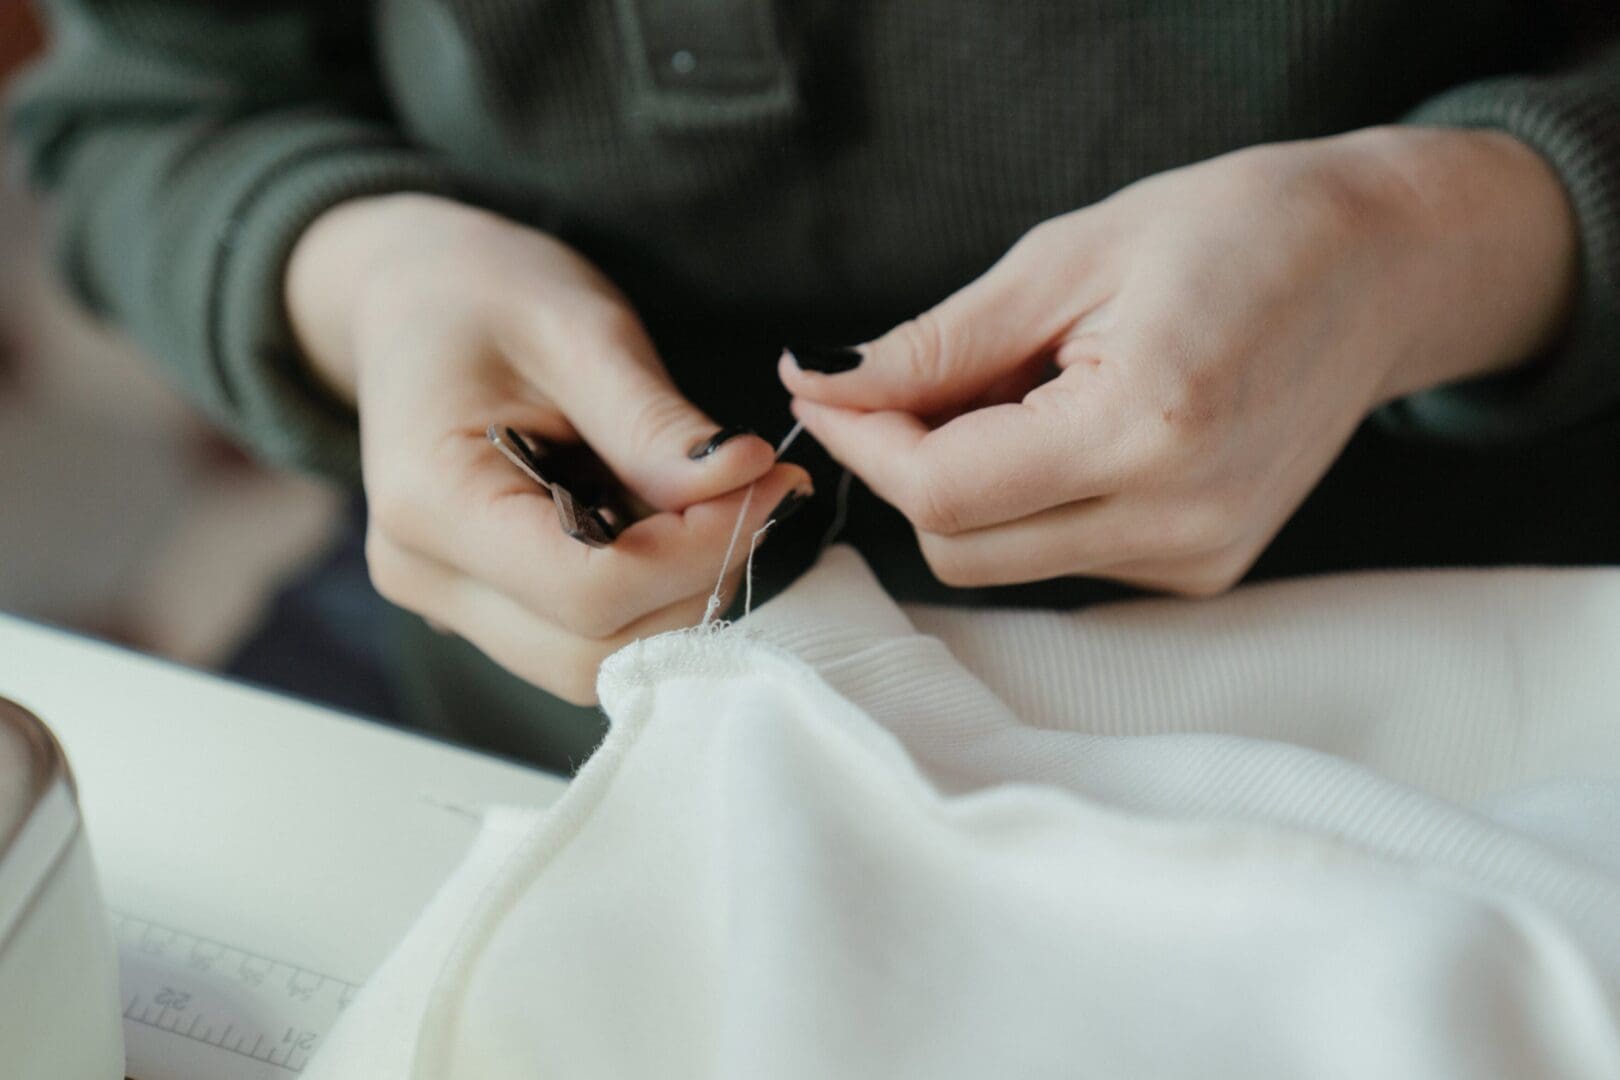 A person sewing something on top of a white sheet.